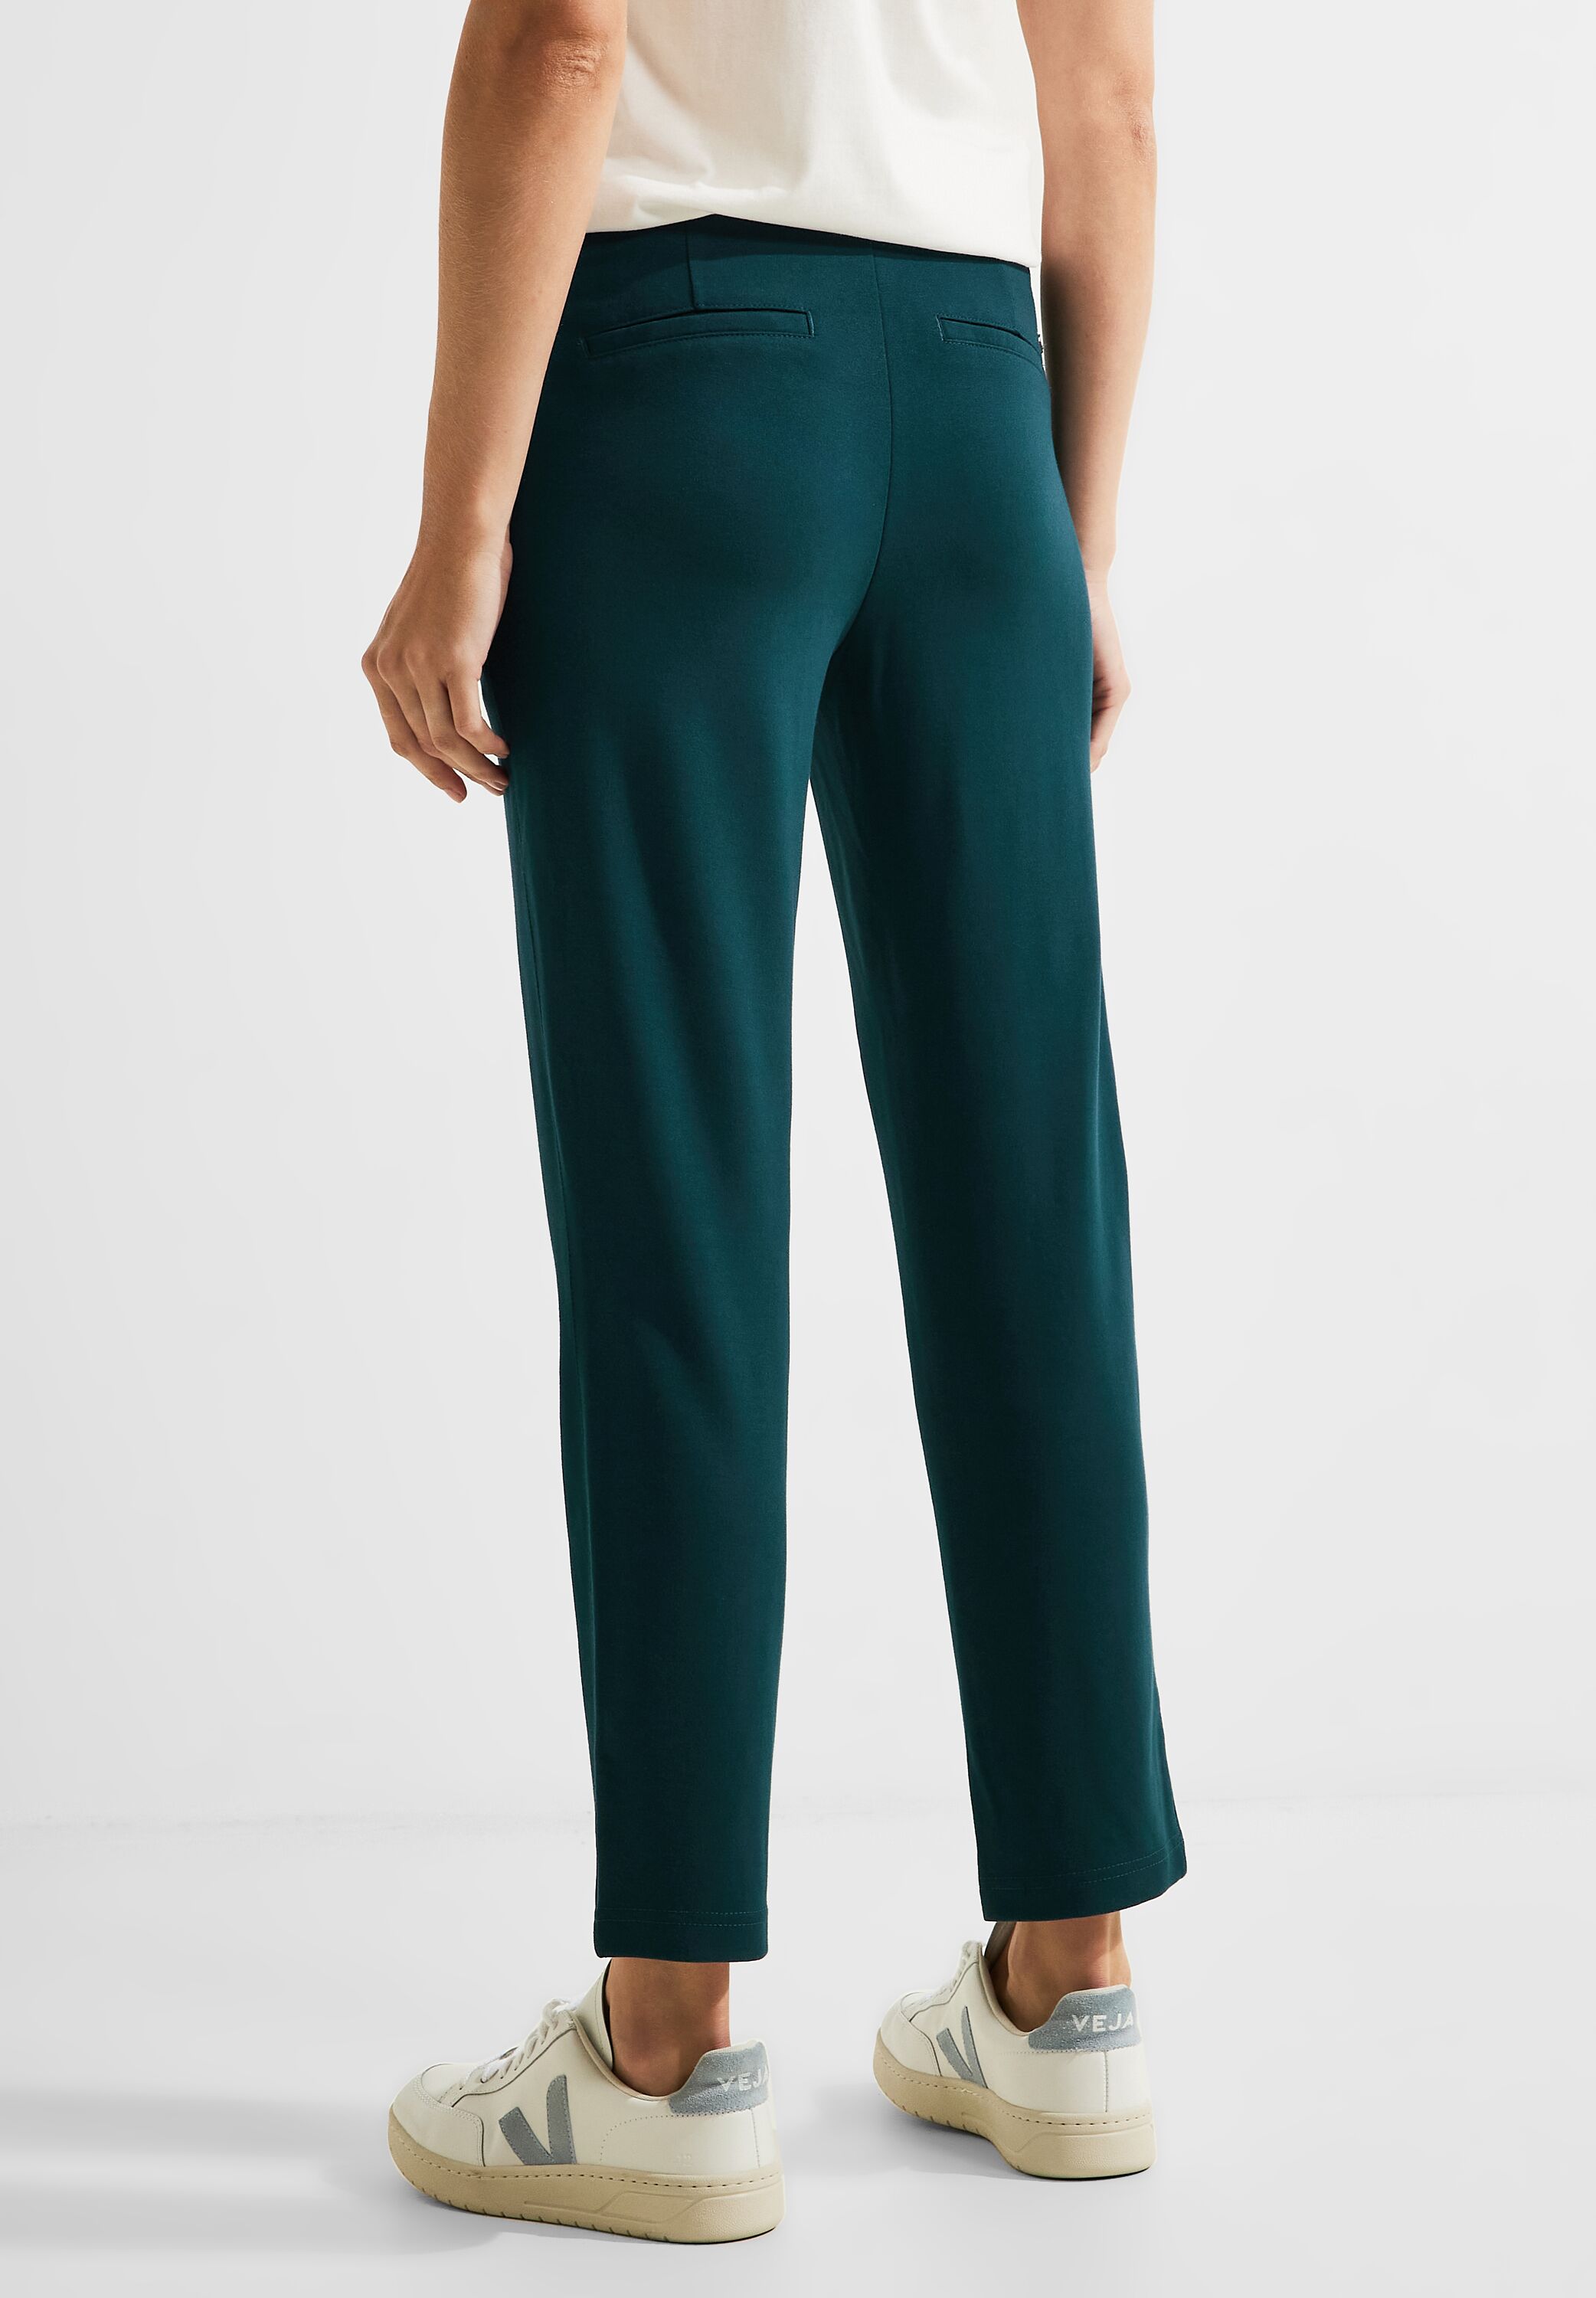 CECIL Joggpant Tracey in Deep Lake Green im SALE reduziert B376689-14926 -  CONCEPT Mode